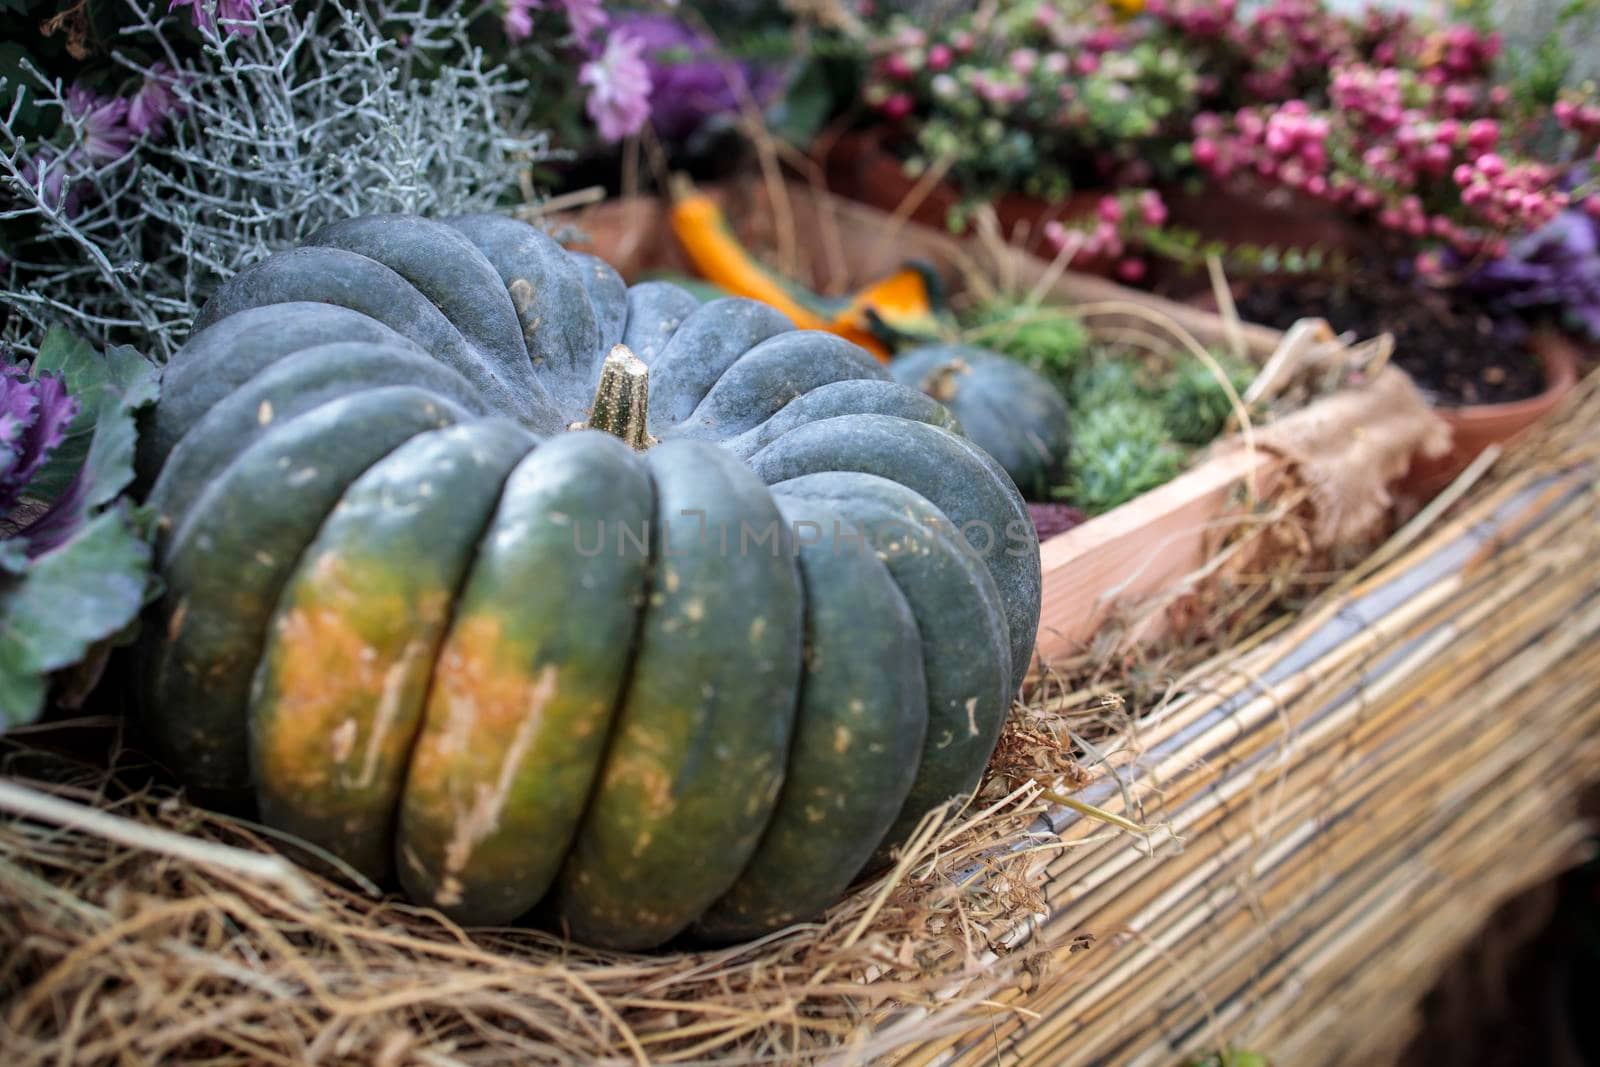 Two giant pumpkins at the traditional autumn exhibition in the Aptekarsky Ogorod (branch of the Moscow State University Botanical Garden).